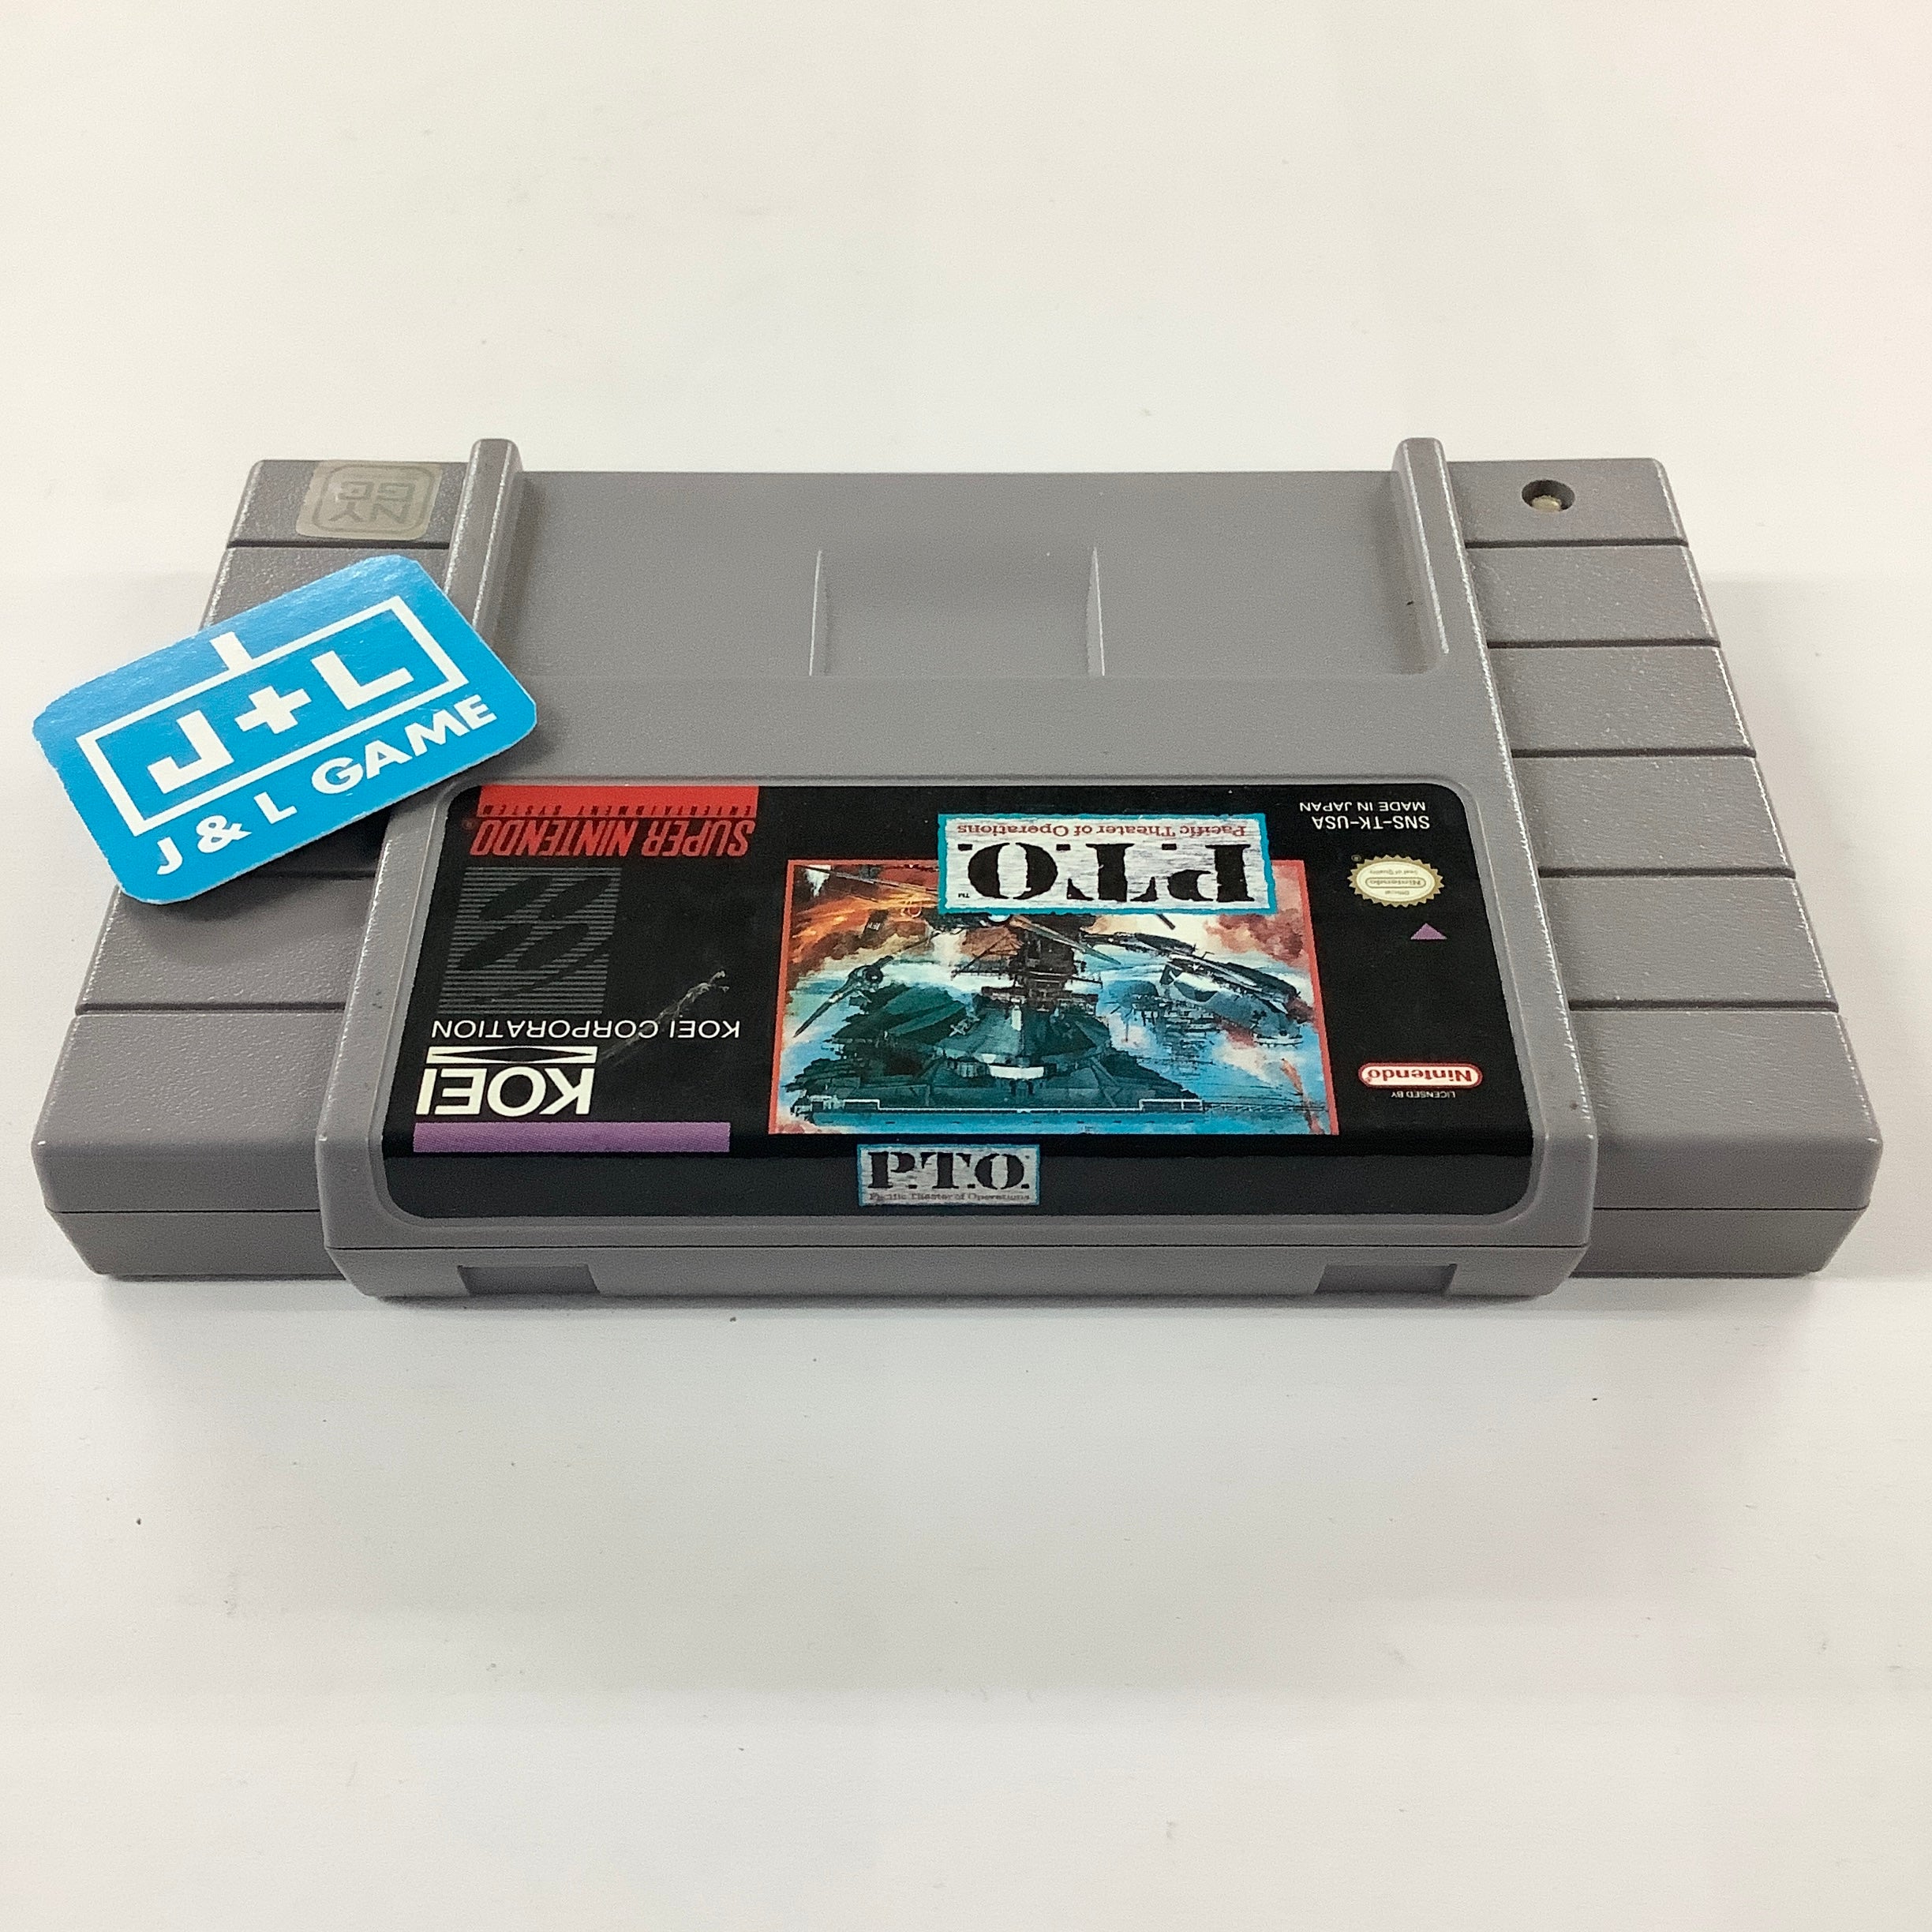 P.T.O.: Pacific Theater of Operations - (SNES) Super Nintendo [Pre-Owned] Video Games Koei   